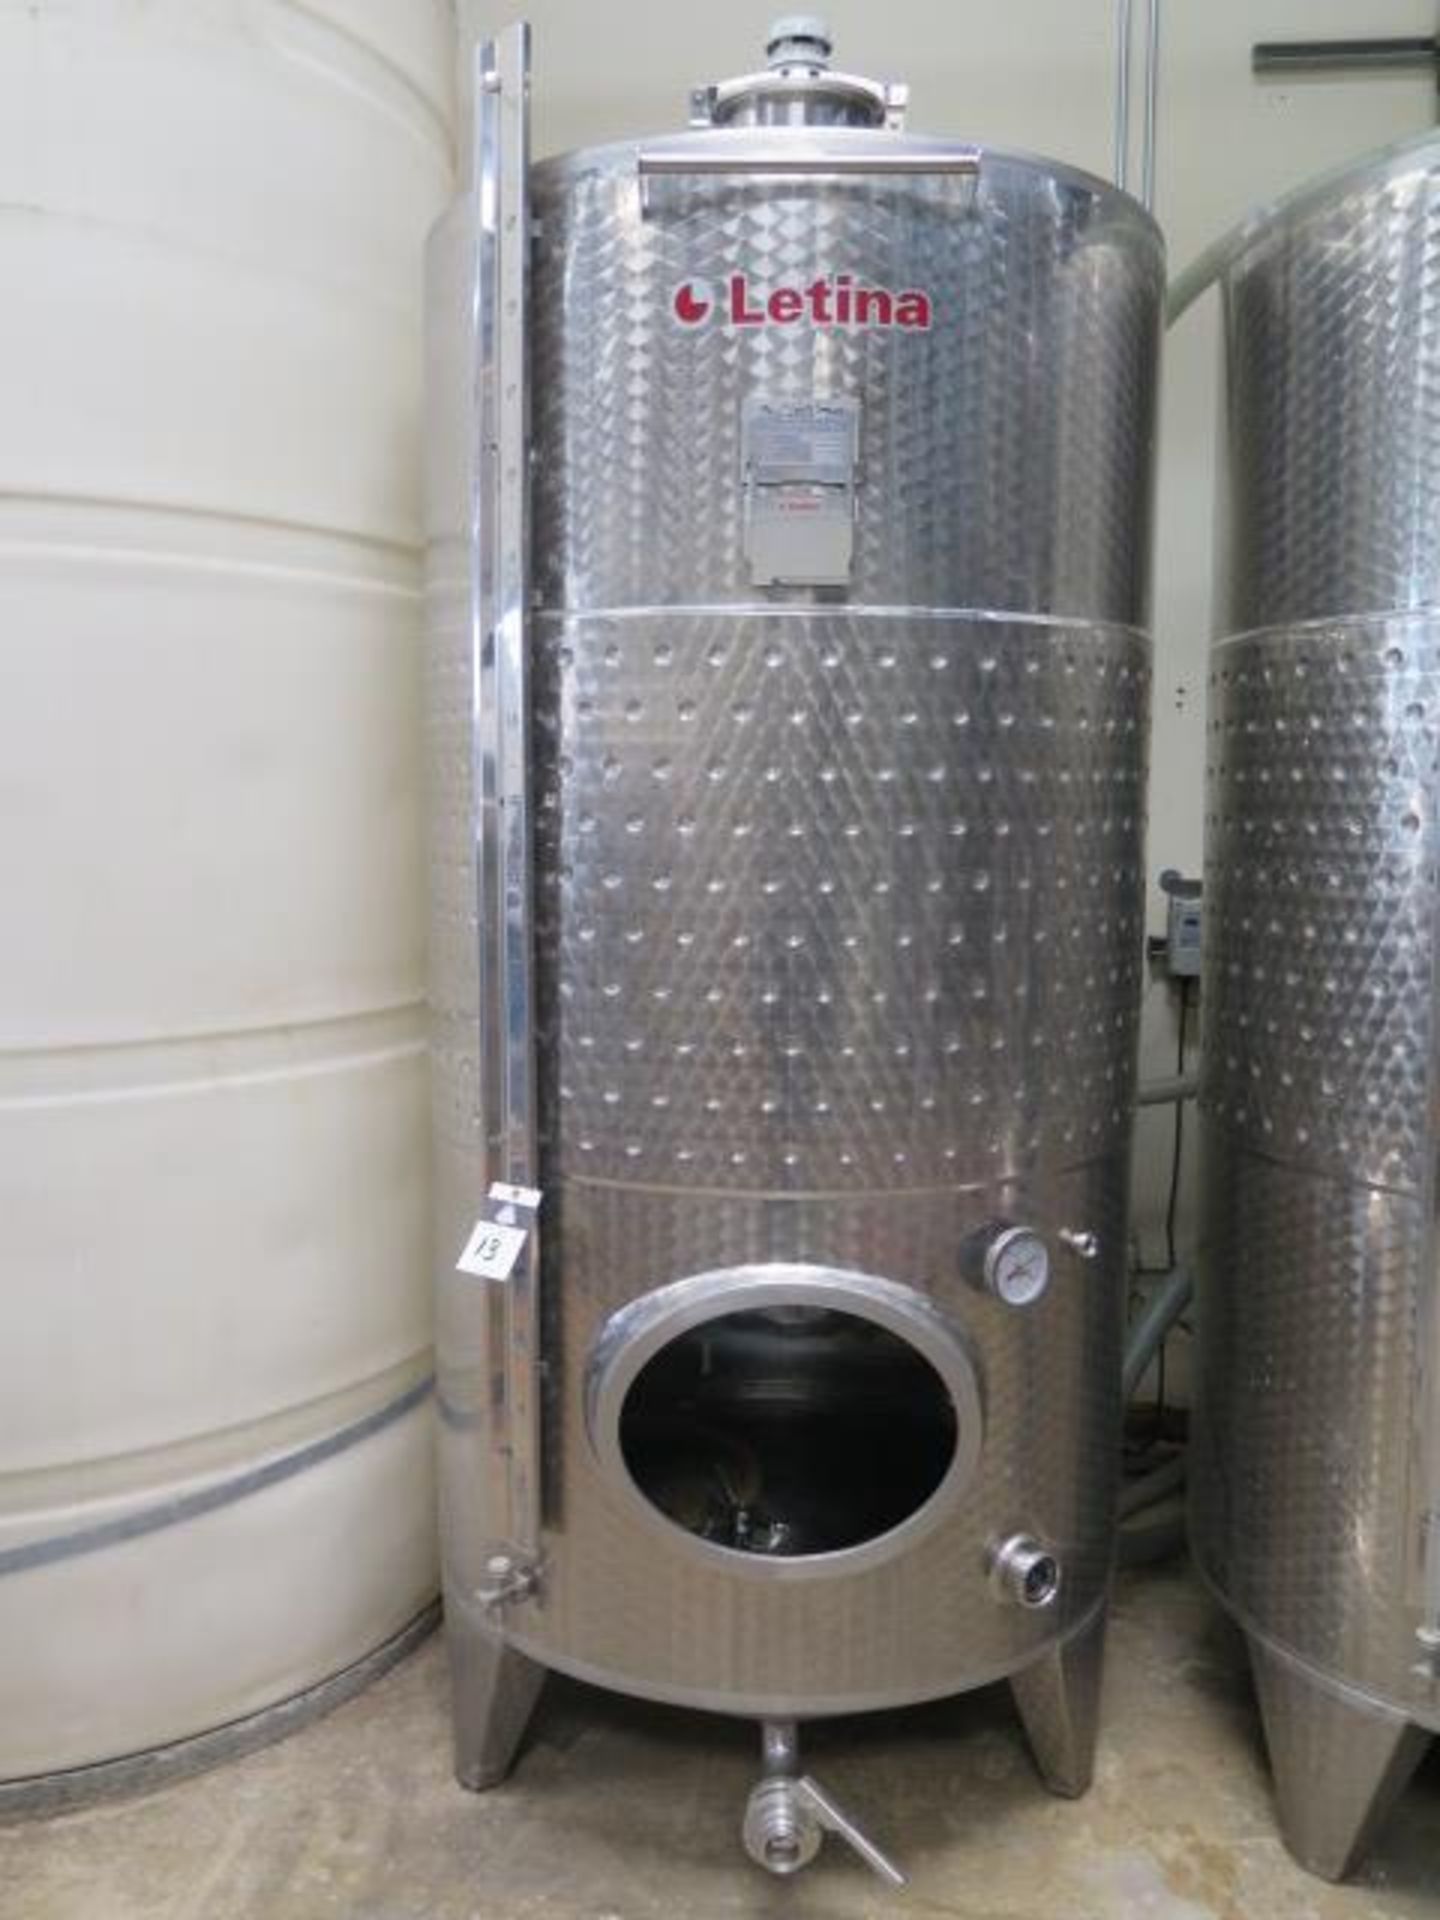 2014 Letina type Z2000HV11 2000 Liter Jacketed Closed Storage Tanks s/n 051014/4 (SOLD AS-IS - NO